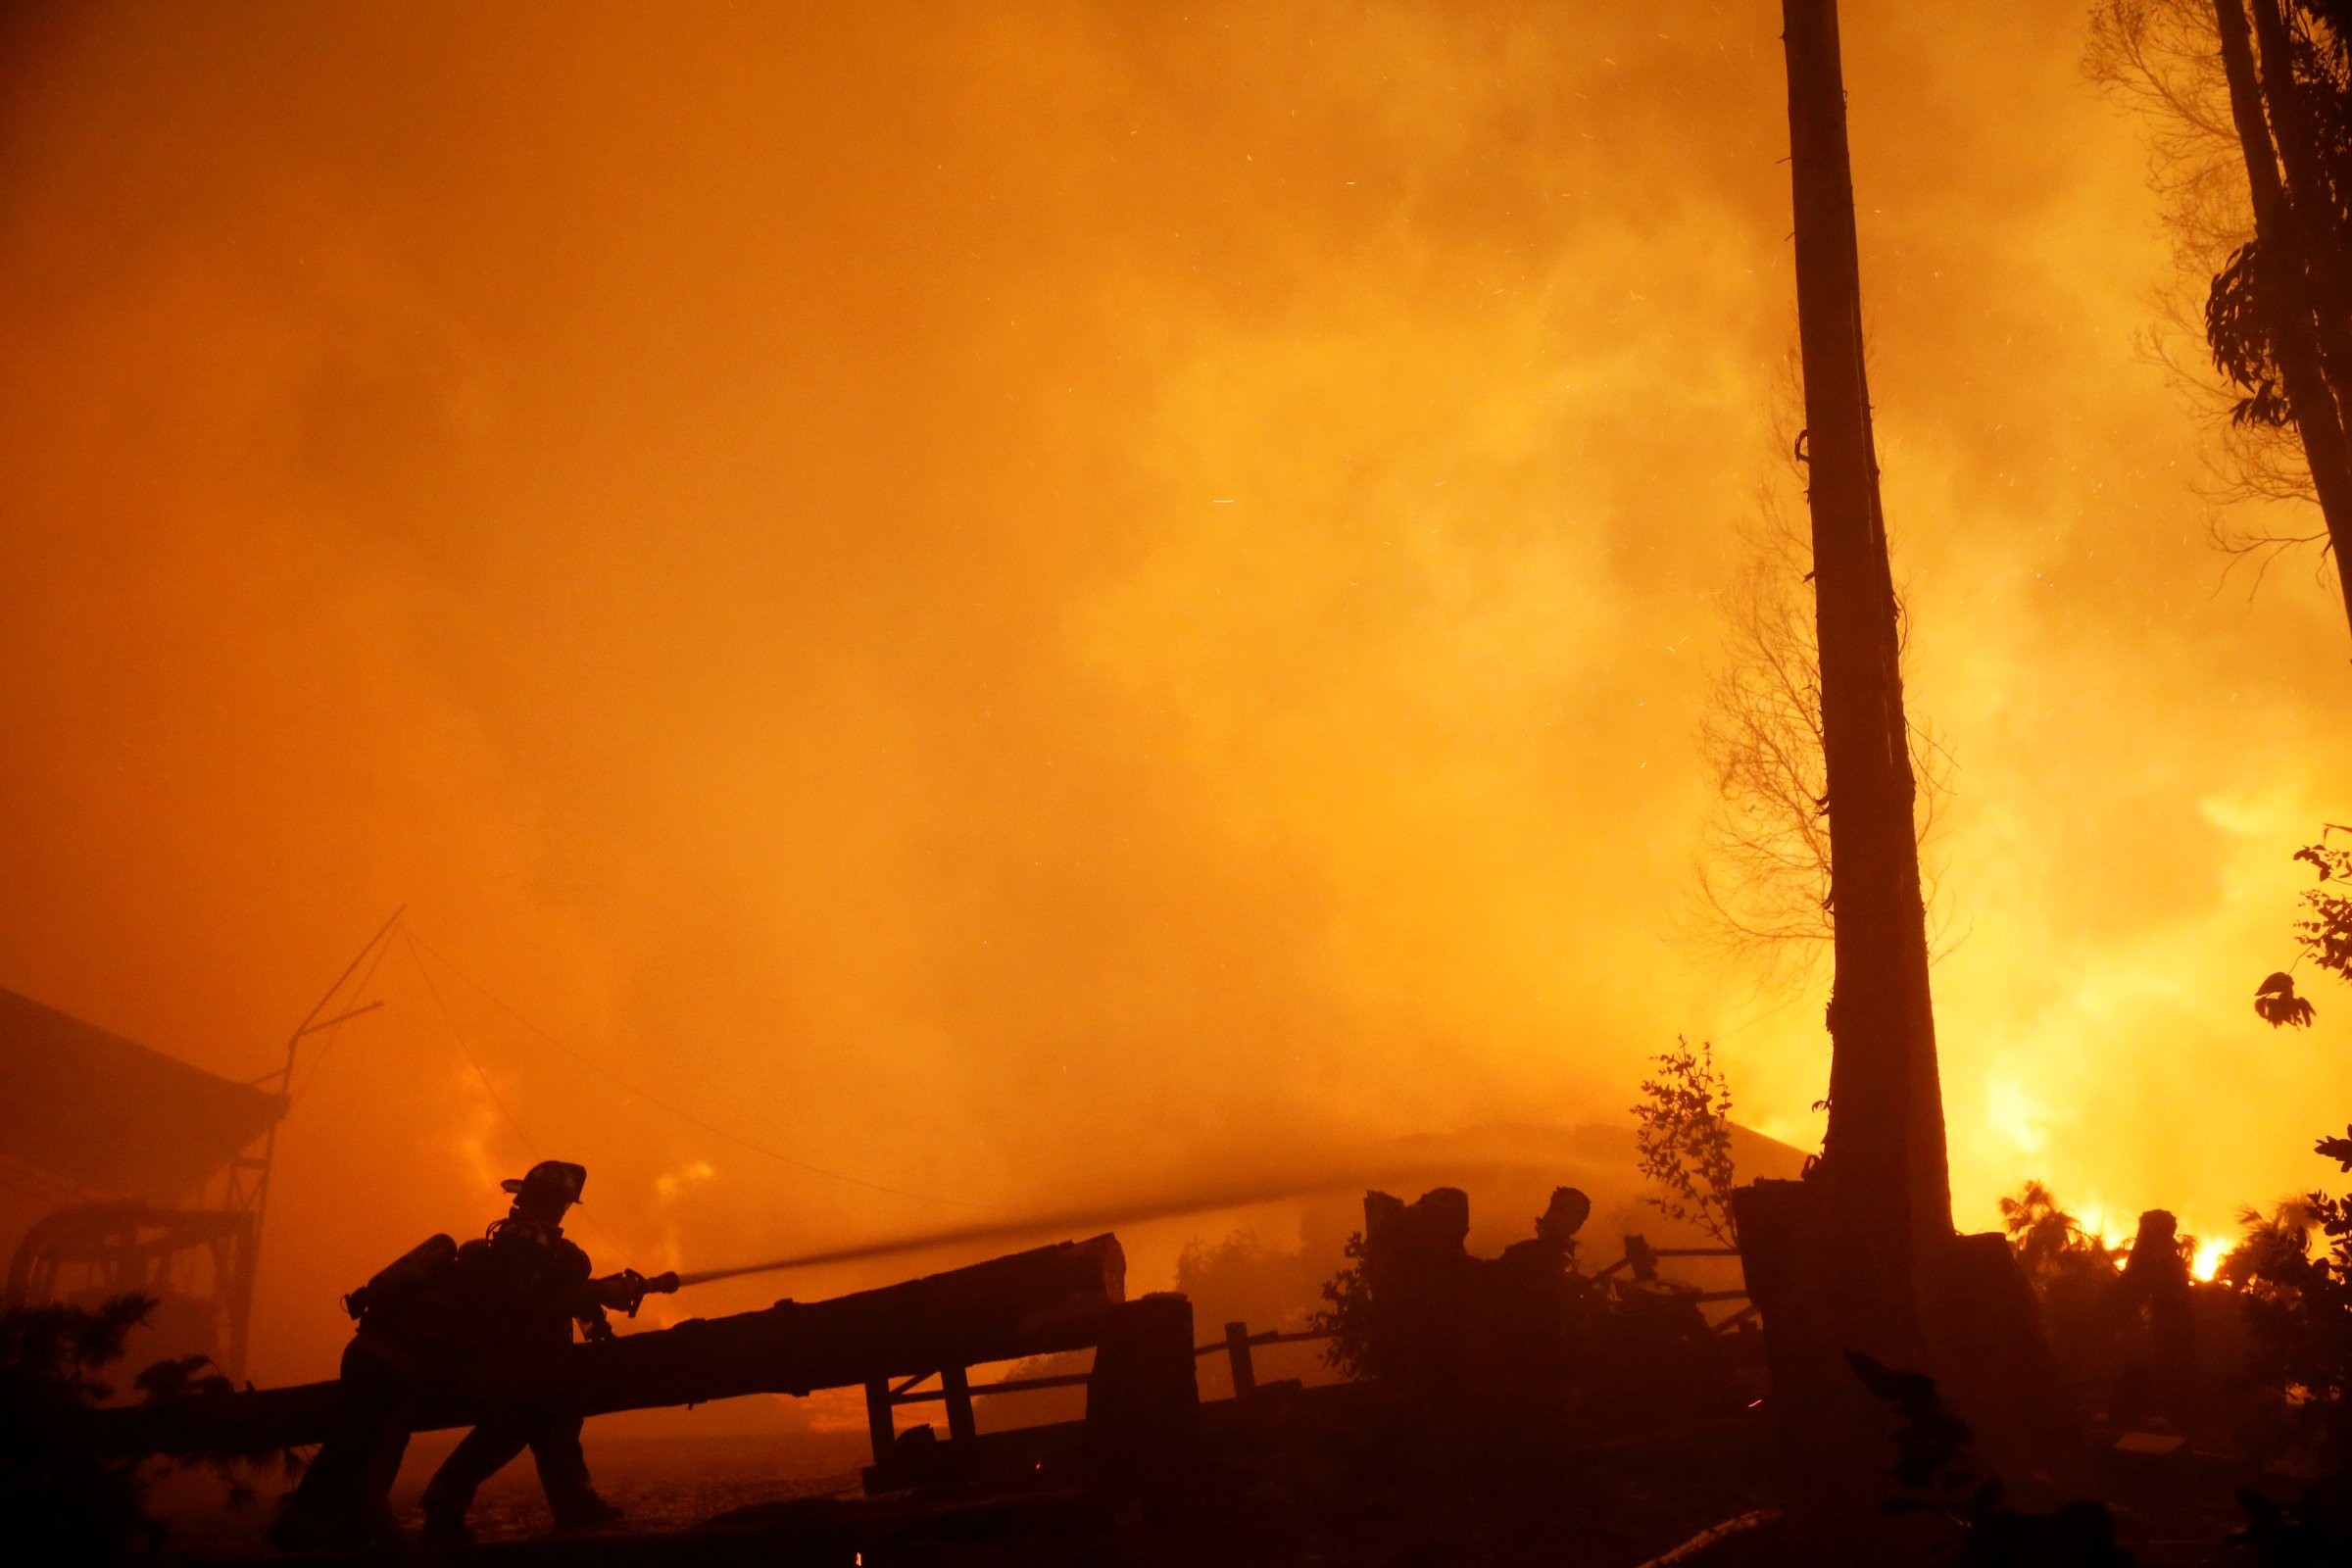 Firefighters try to stop a fire as the worst wildfires in Chile's modern history ravage wide swaths of the country's central-south regions